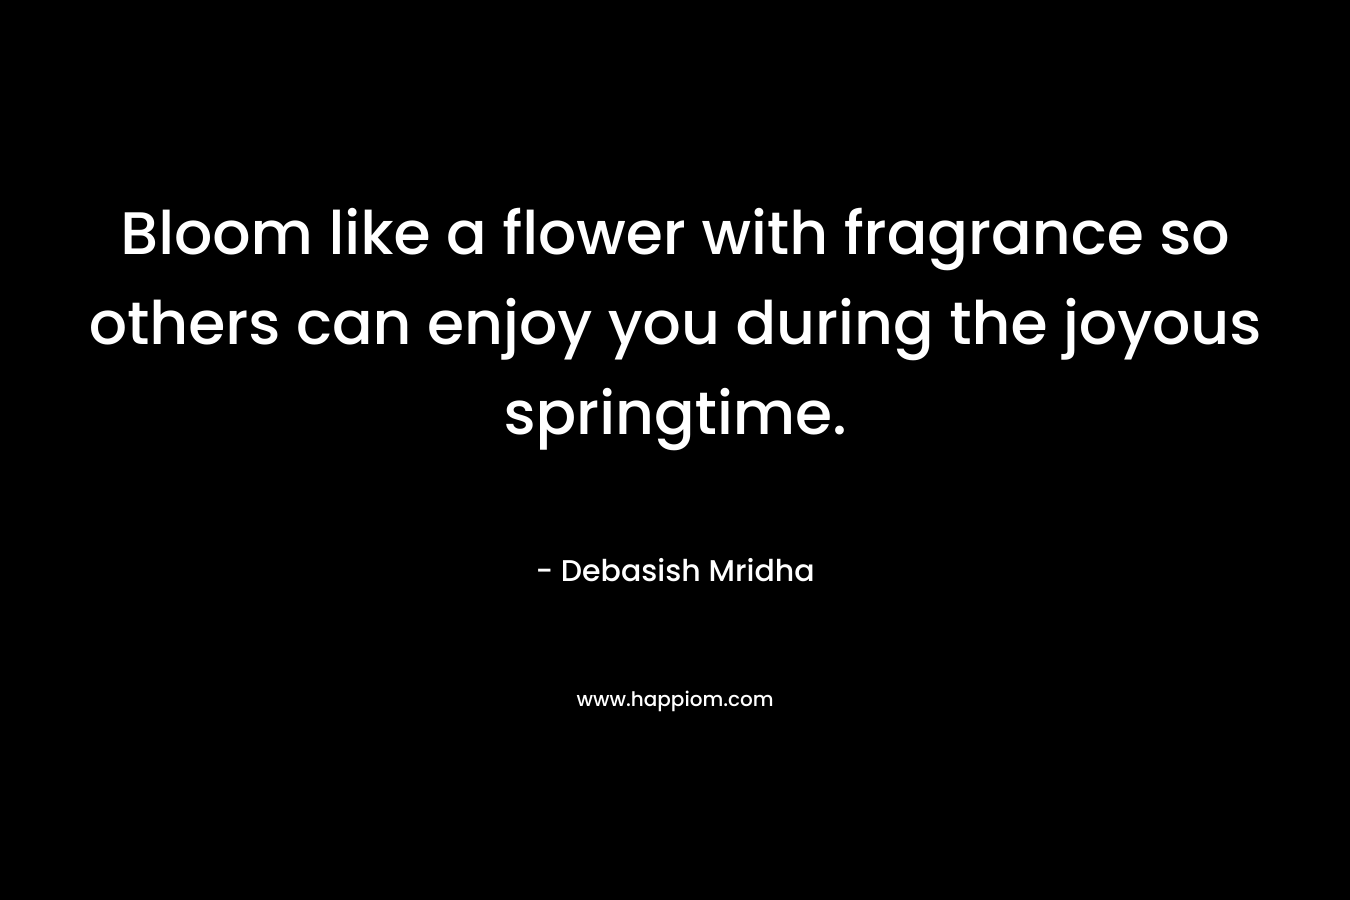 Bloom like a flower with fragrance so others can enjoy you during the joyous springtime.